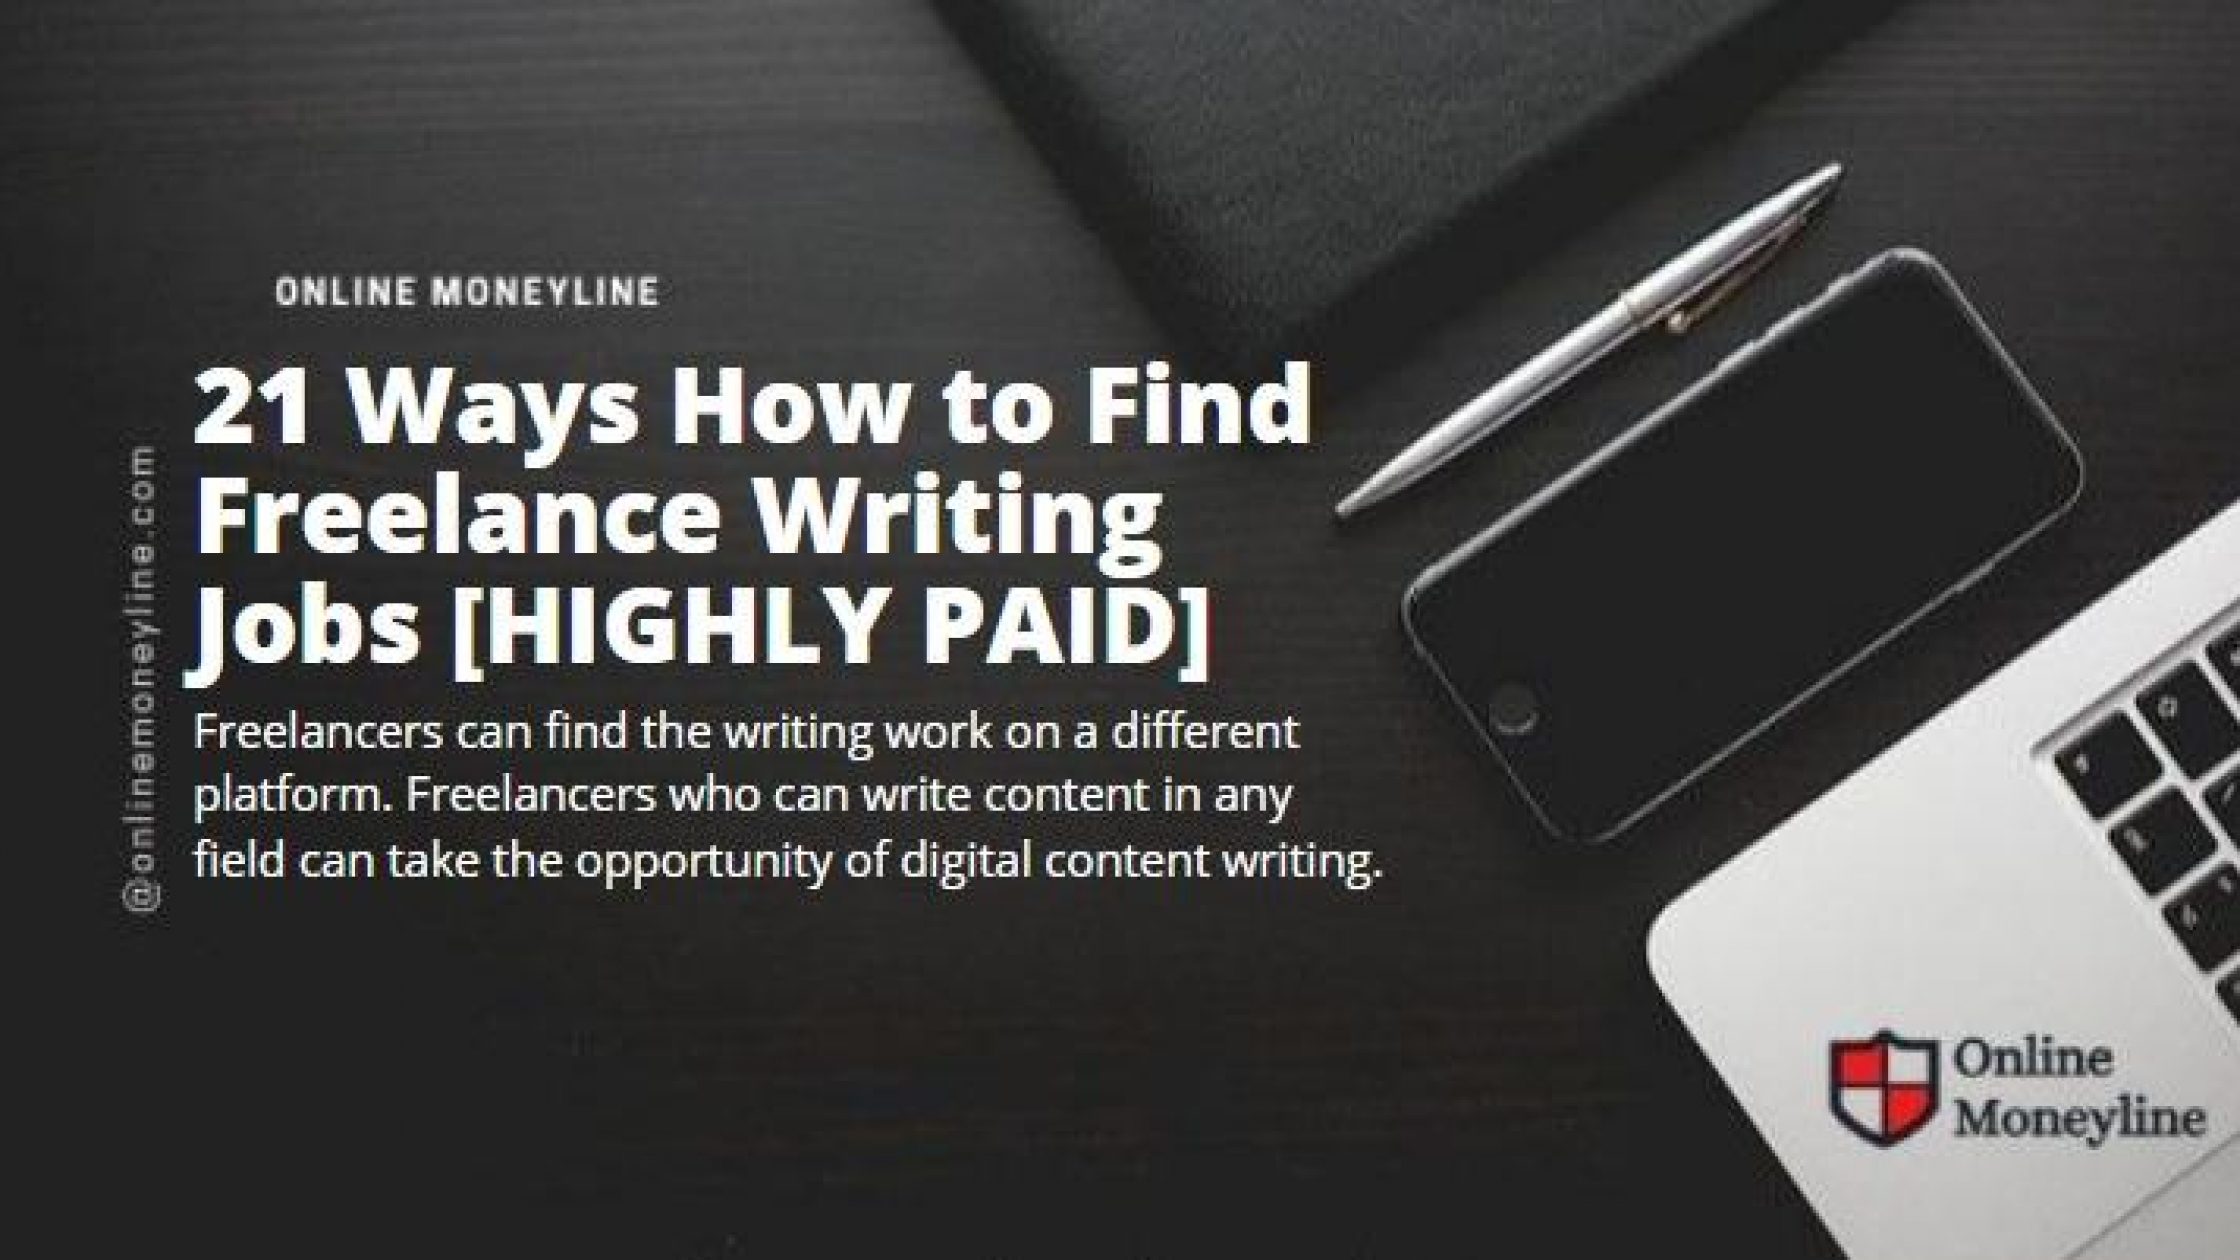 21 Ways How to Find Freelance Writing Jobs [HIGHLY PAID]